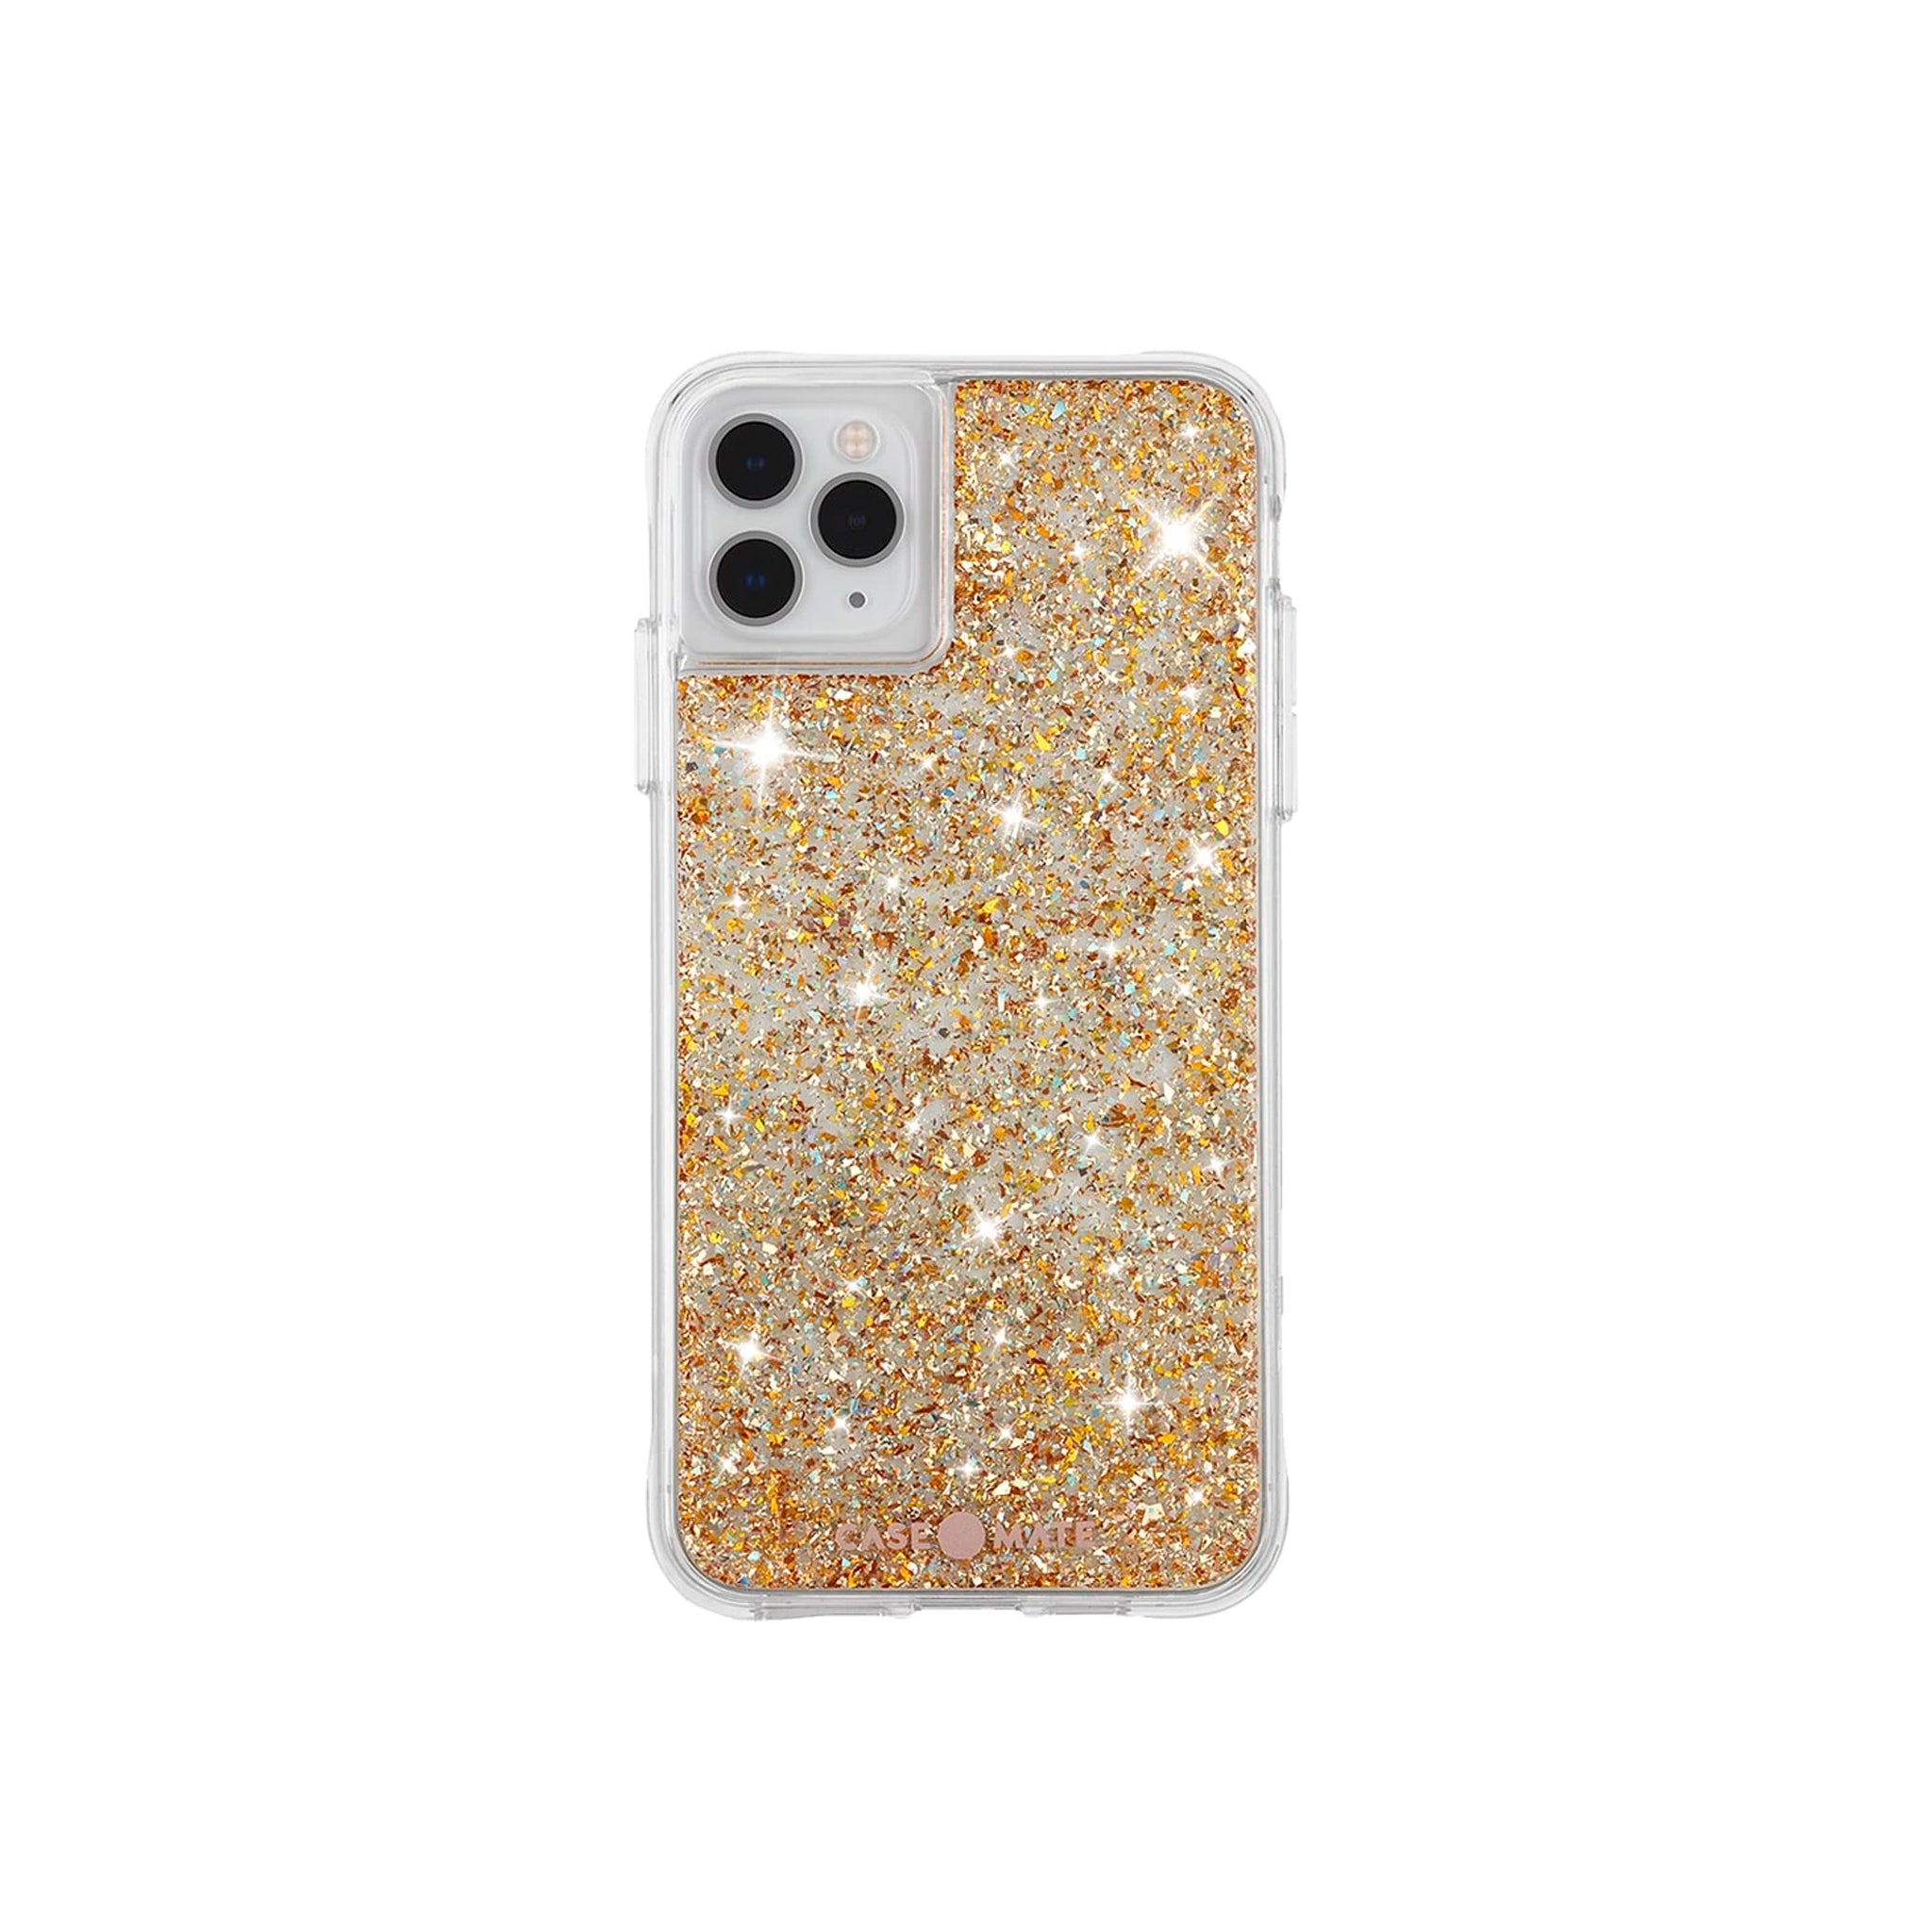 Case-mate - Twinkle Case For Apple iPhone 11 Pro Max / Xs Max - Gold